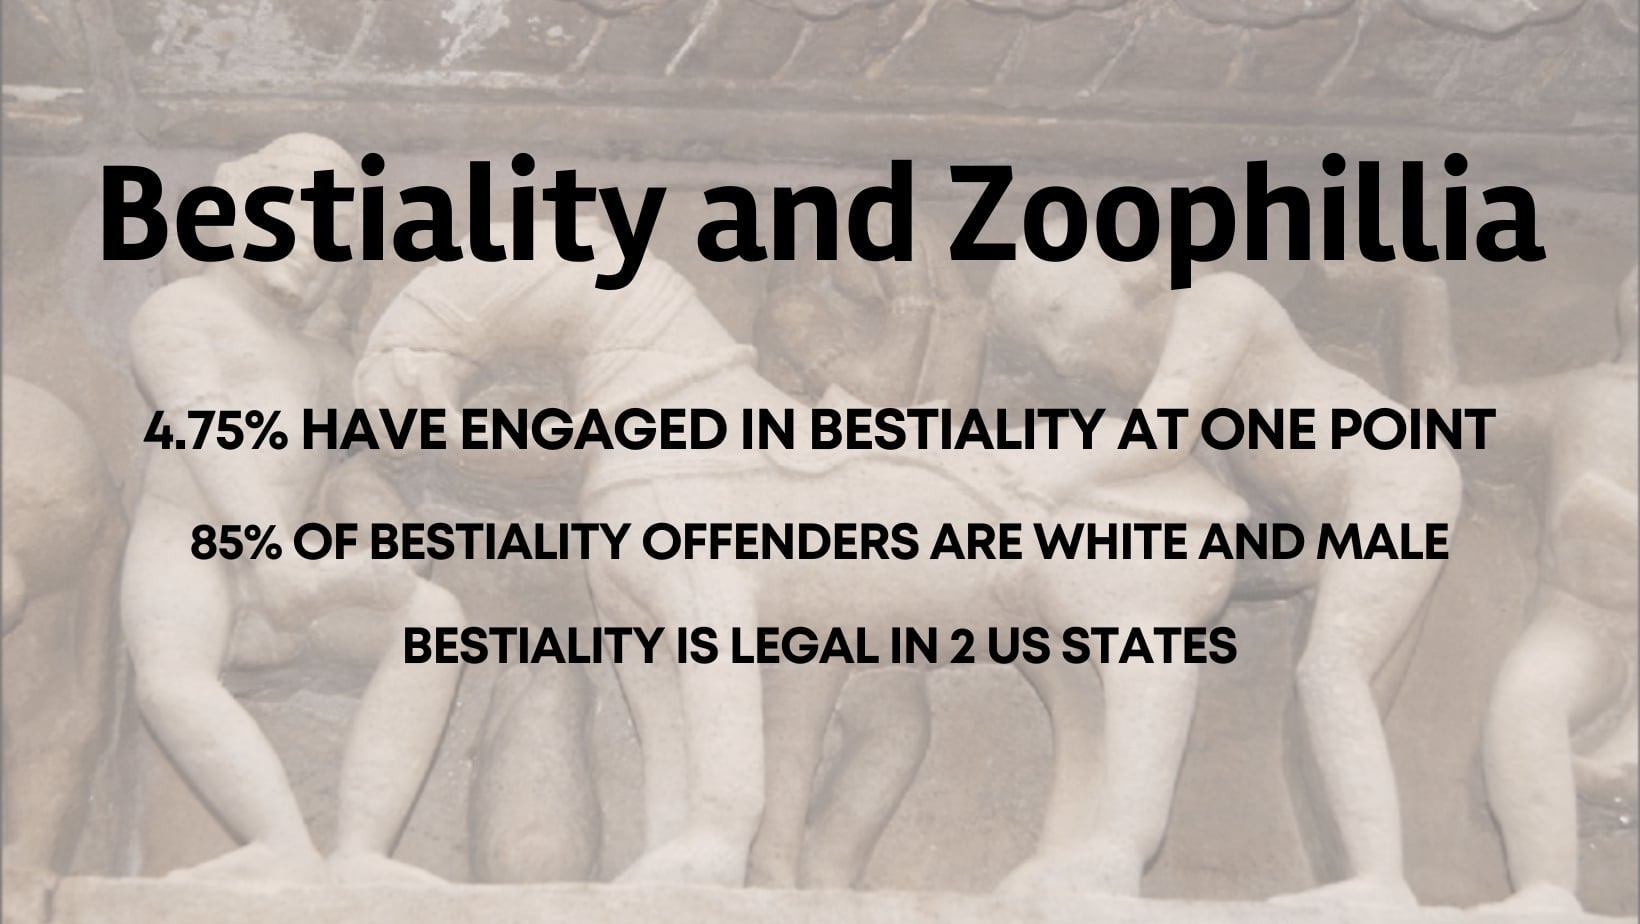 How Common Is Bestiality and Zoophillia? Definitions, Facts, and Statistics